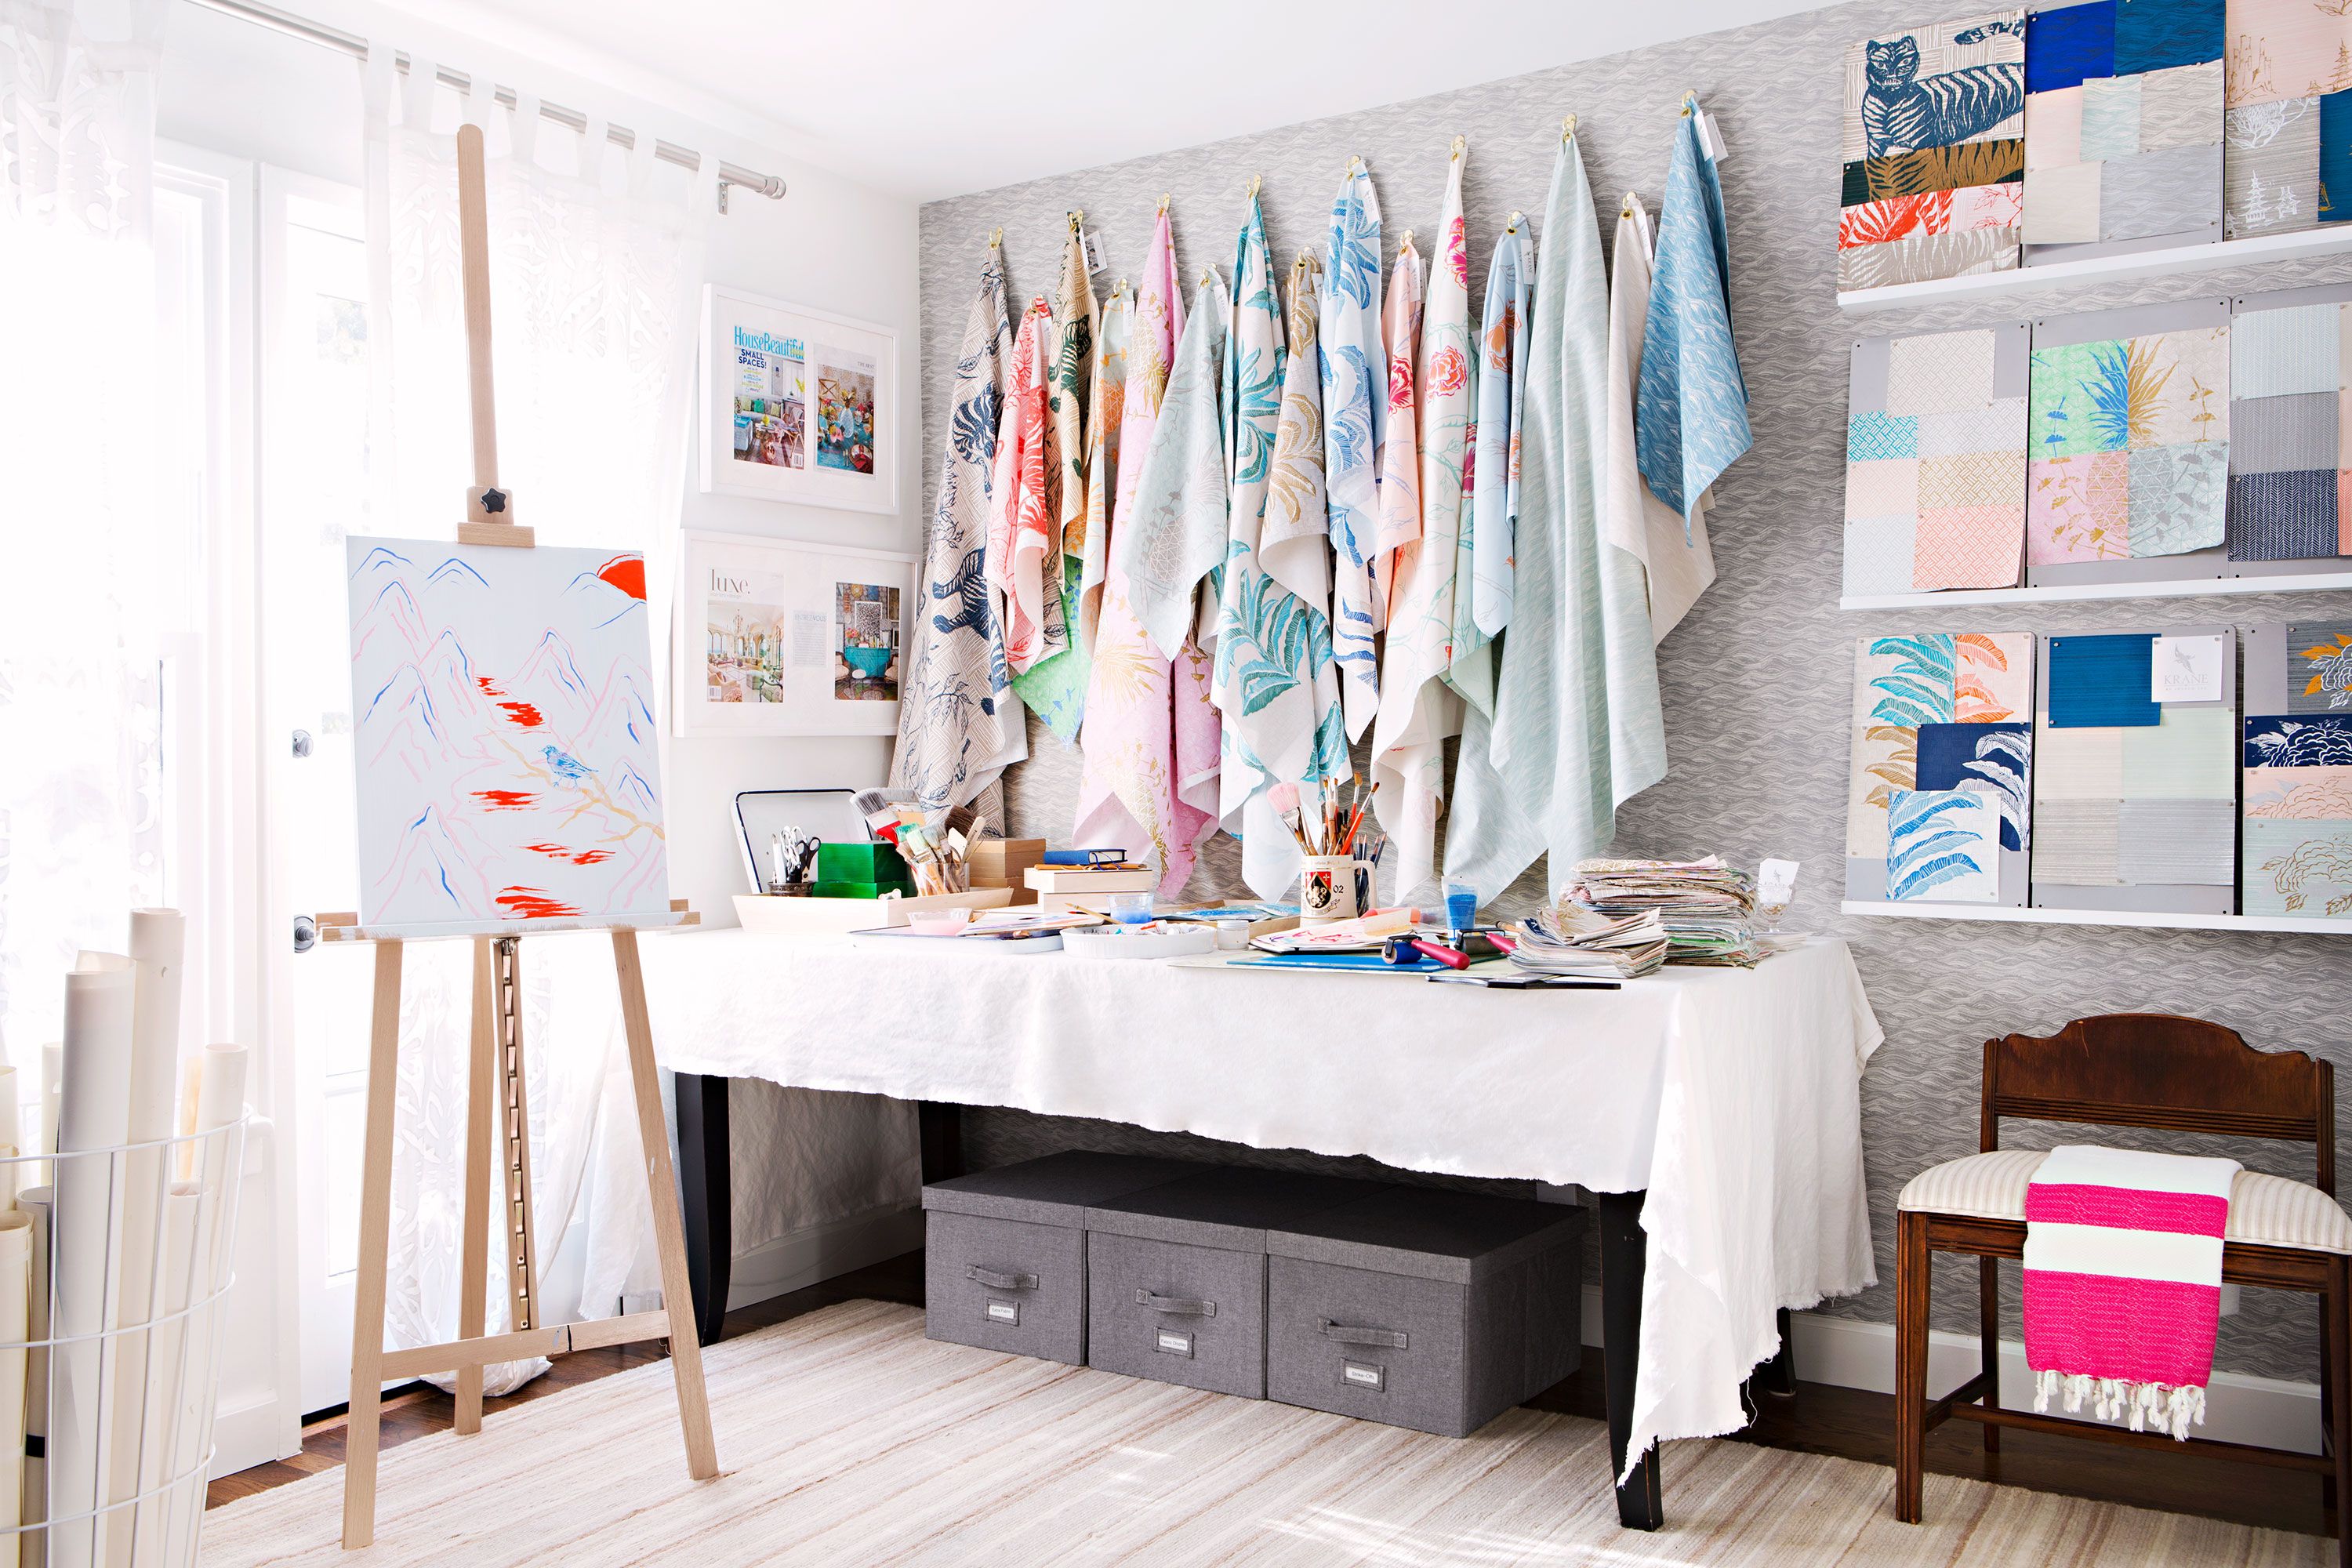 9 Ideas to Decorate your Sewing Room - Threads